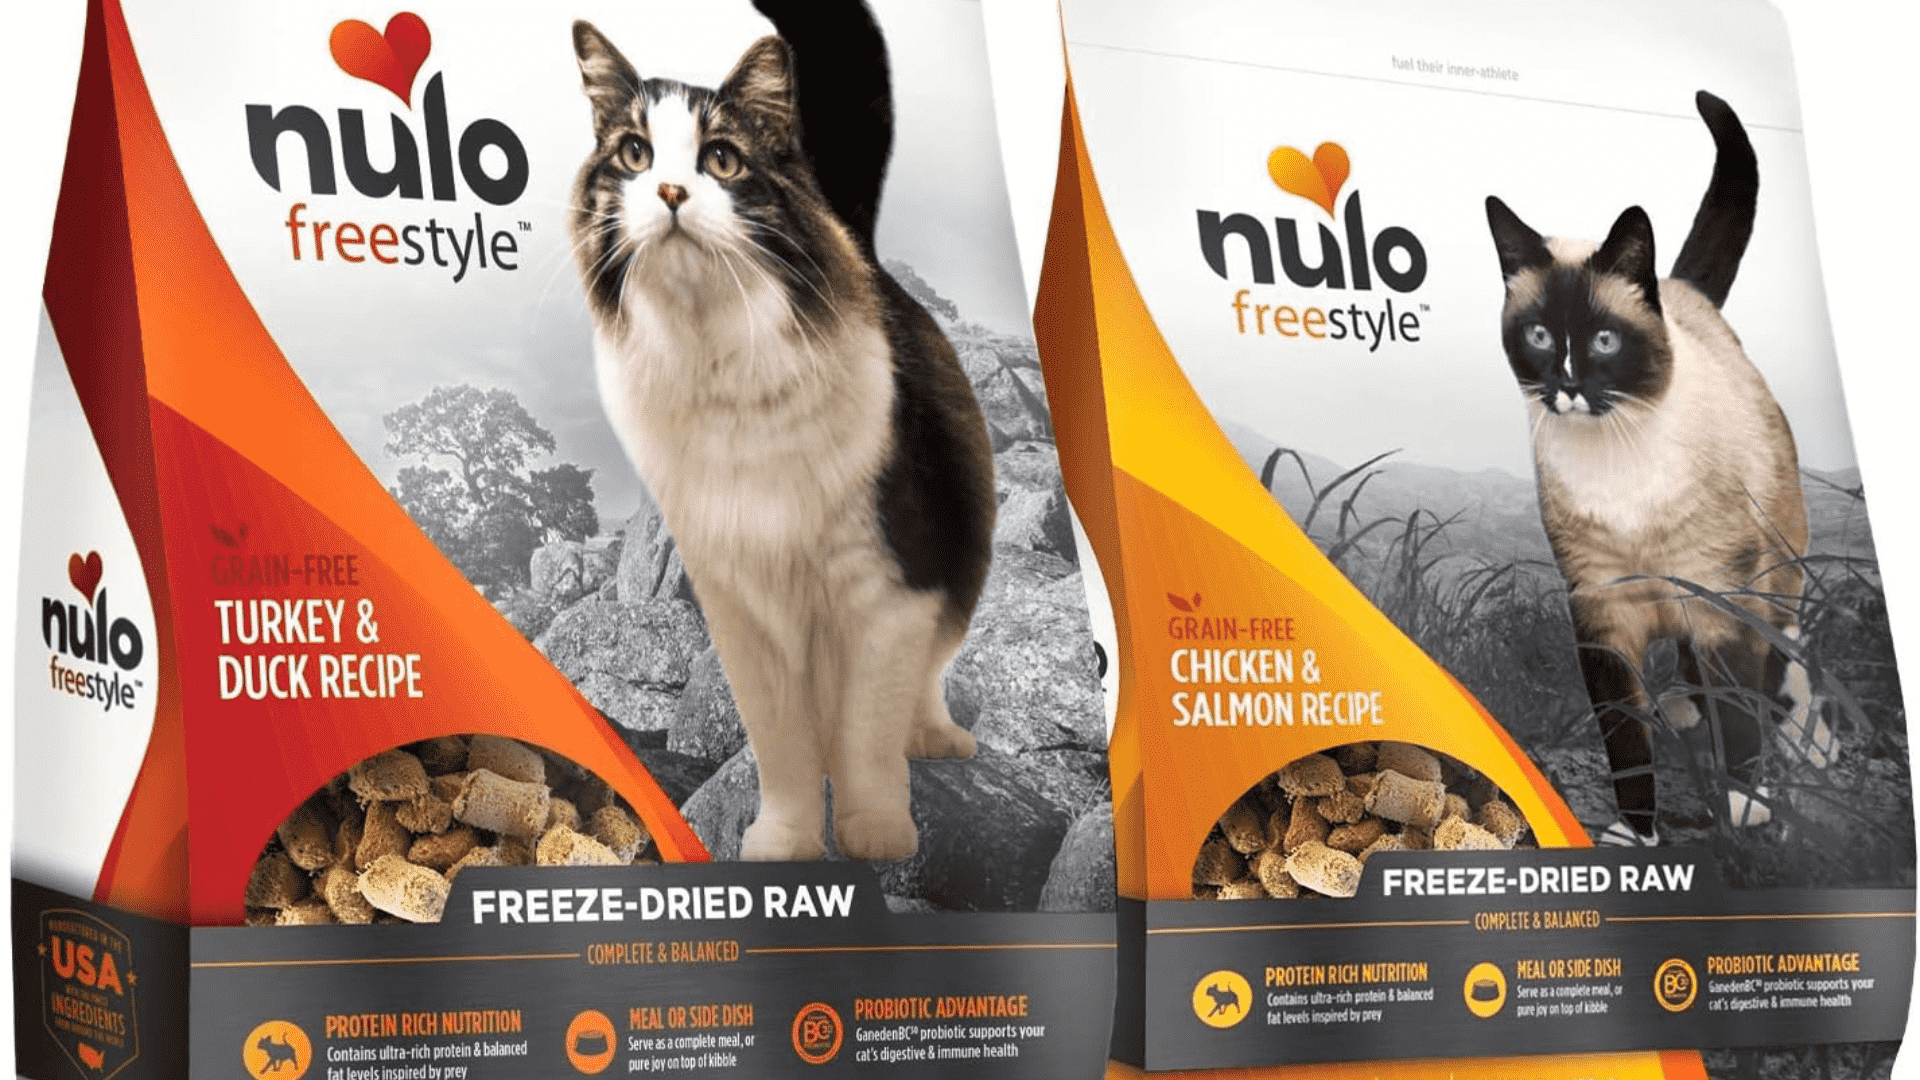 Is Nulo a Good Cat Food for Kittens